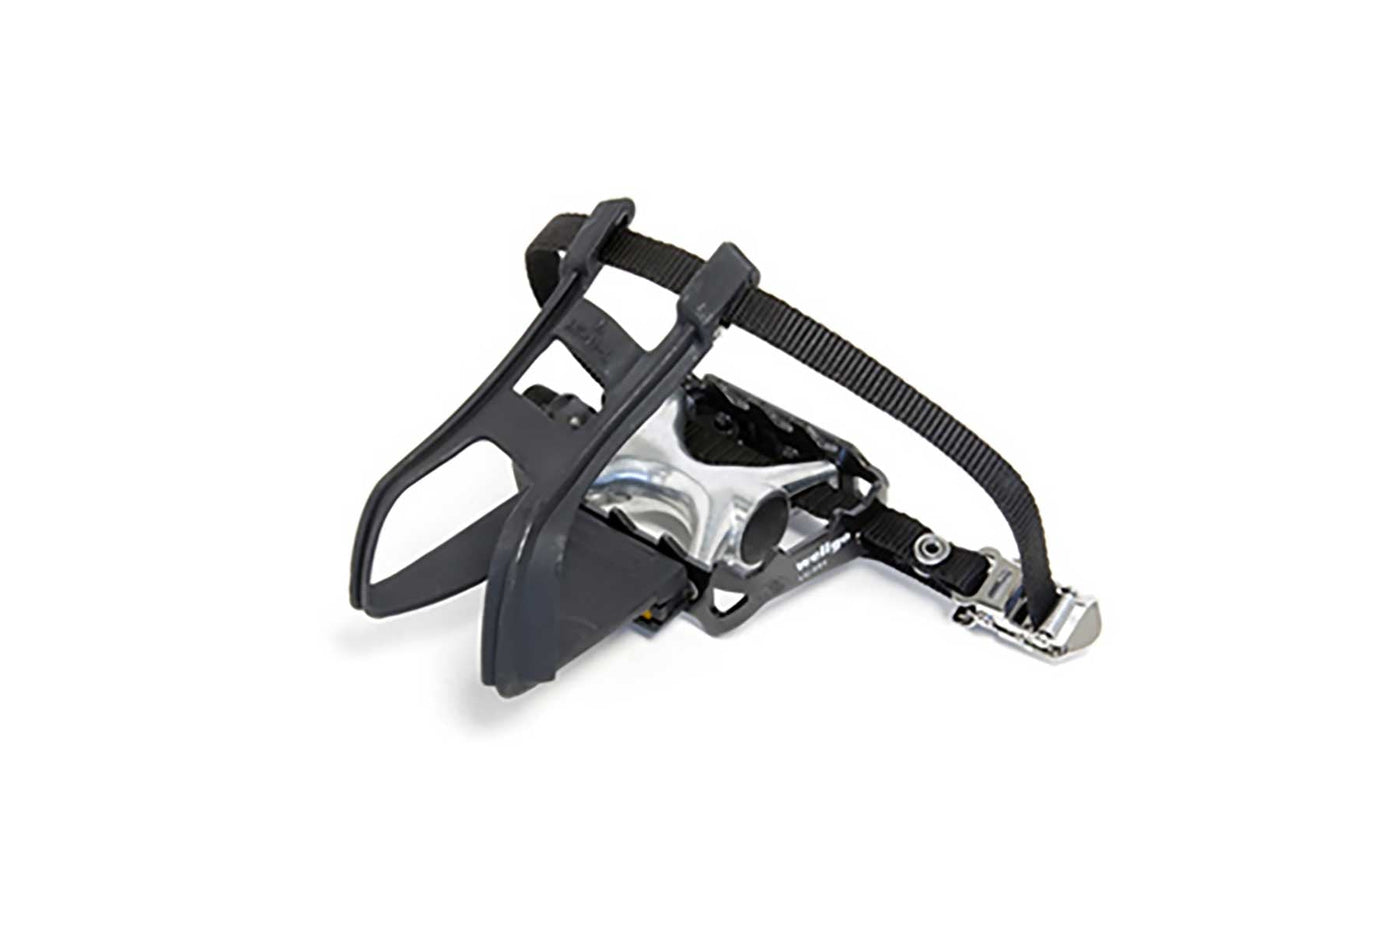 MTB Pedals with Clips and Straps